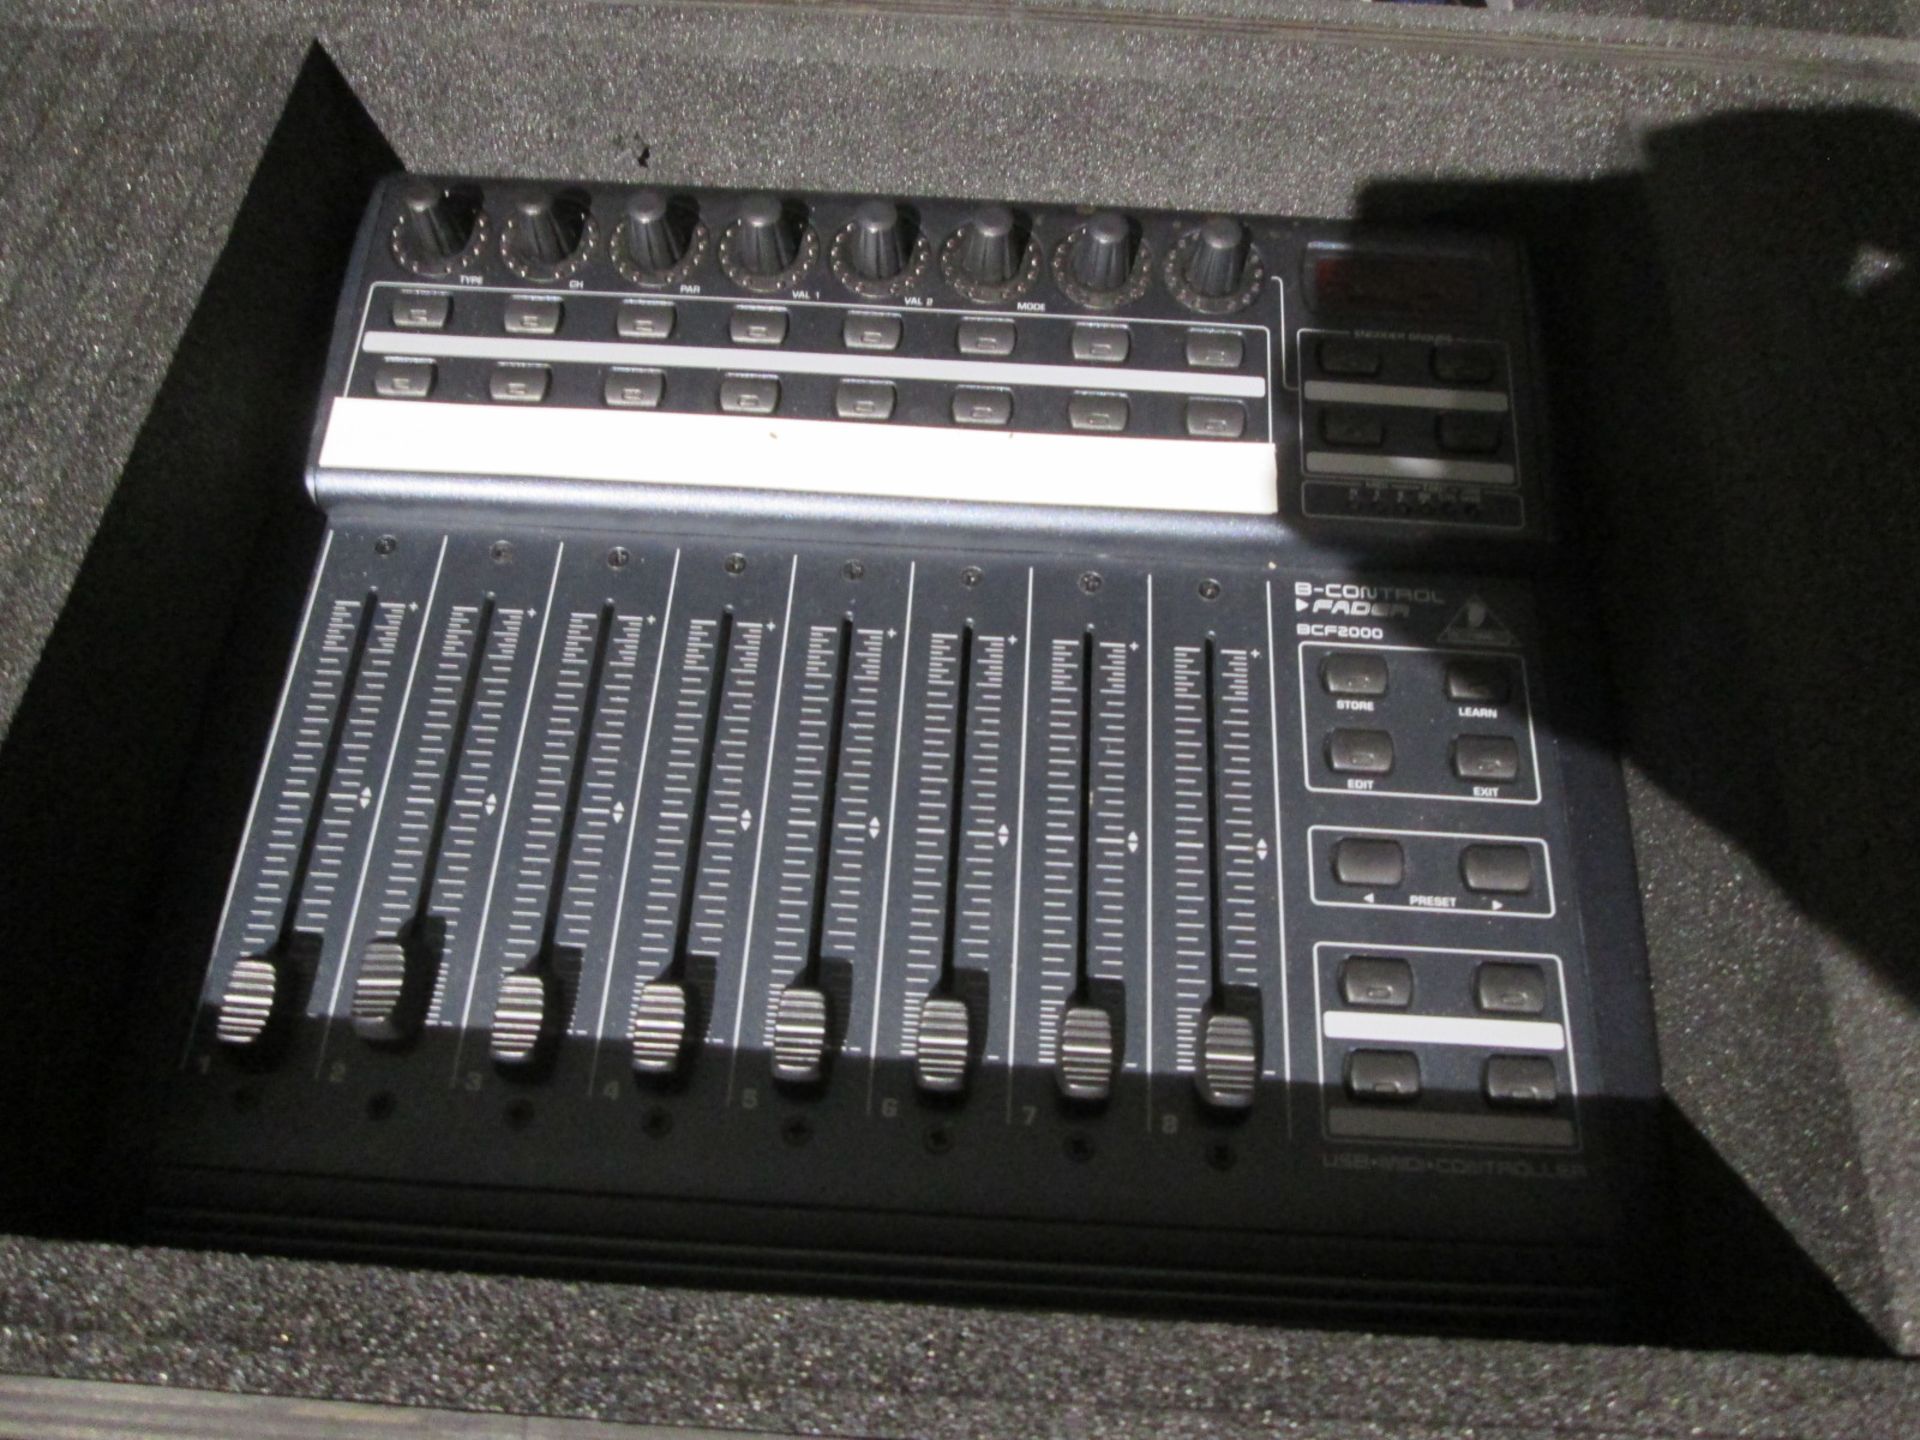 Green Hippo V5 Hippotiser Media Graphics Server with fader remote panel. S/N 2200. In flight case - Image 5 of 9